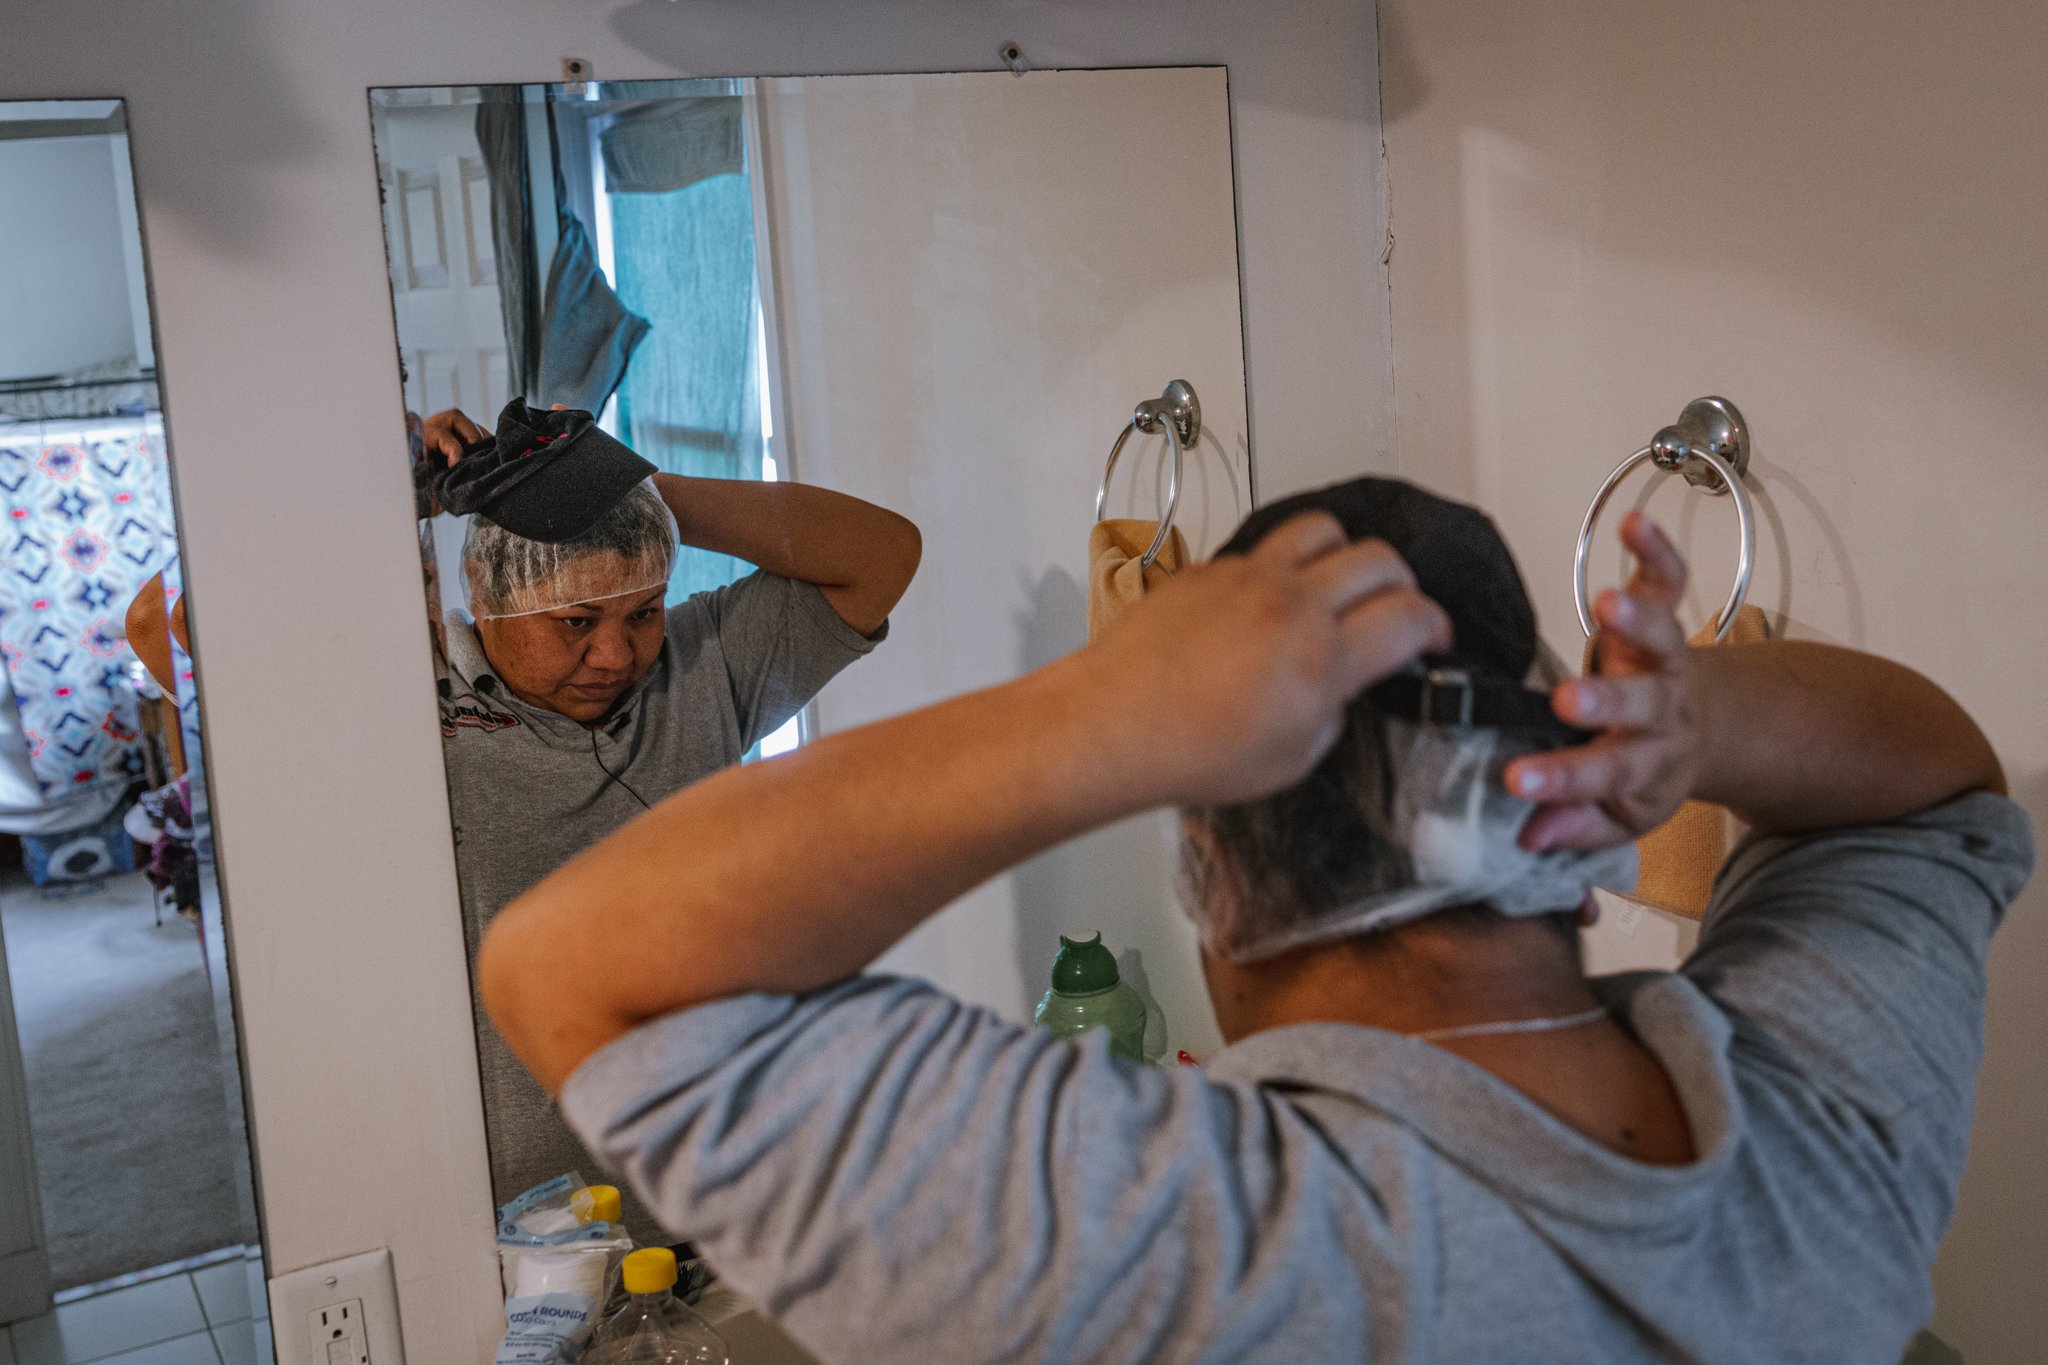  Melva Guadalupe Vázquez, 28, of Ciudad del Maíz, in San Luis Potosí, Mexico prepares for her shift at a crab processing plant in Hoopers Island, Maryland. “I’m not here to take anyone’s job. There are a lot of Latino hands in this country lifting